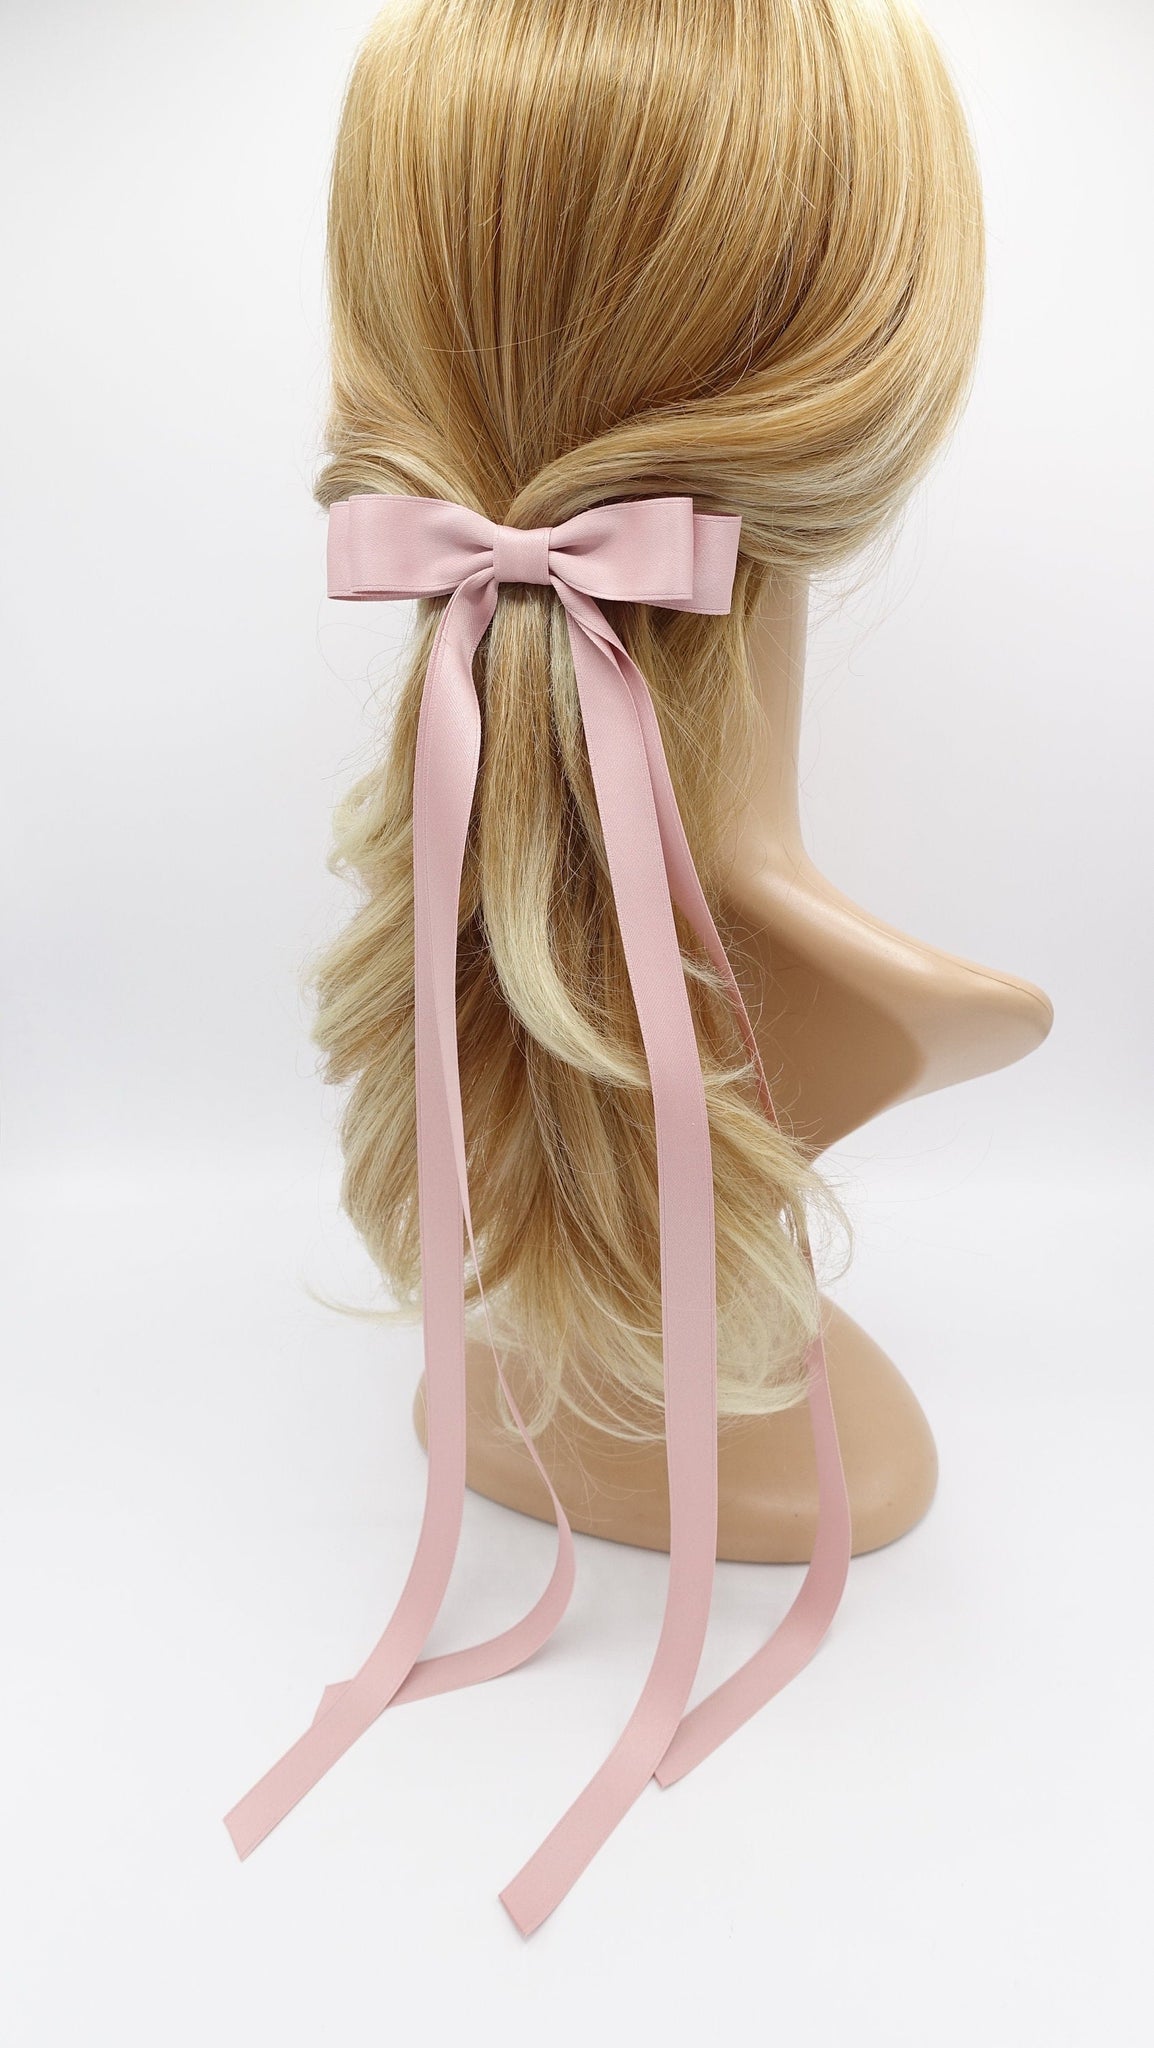 veryshine.com Barrette (Bow) Pink satin hair bow, extra long hair bow for women